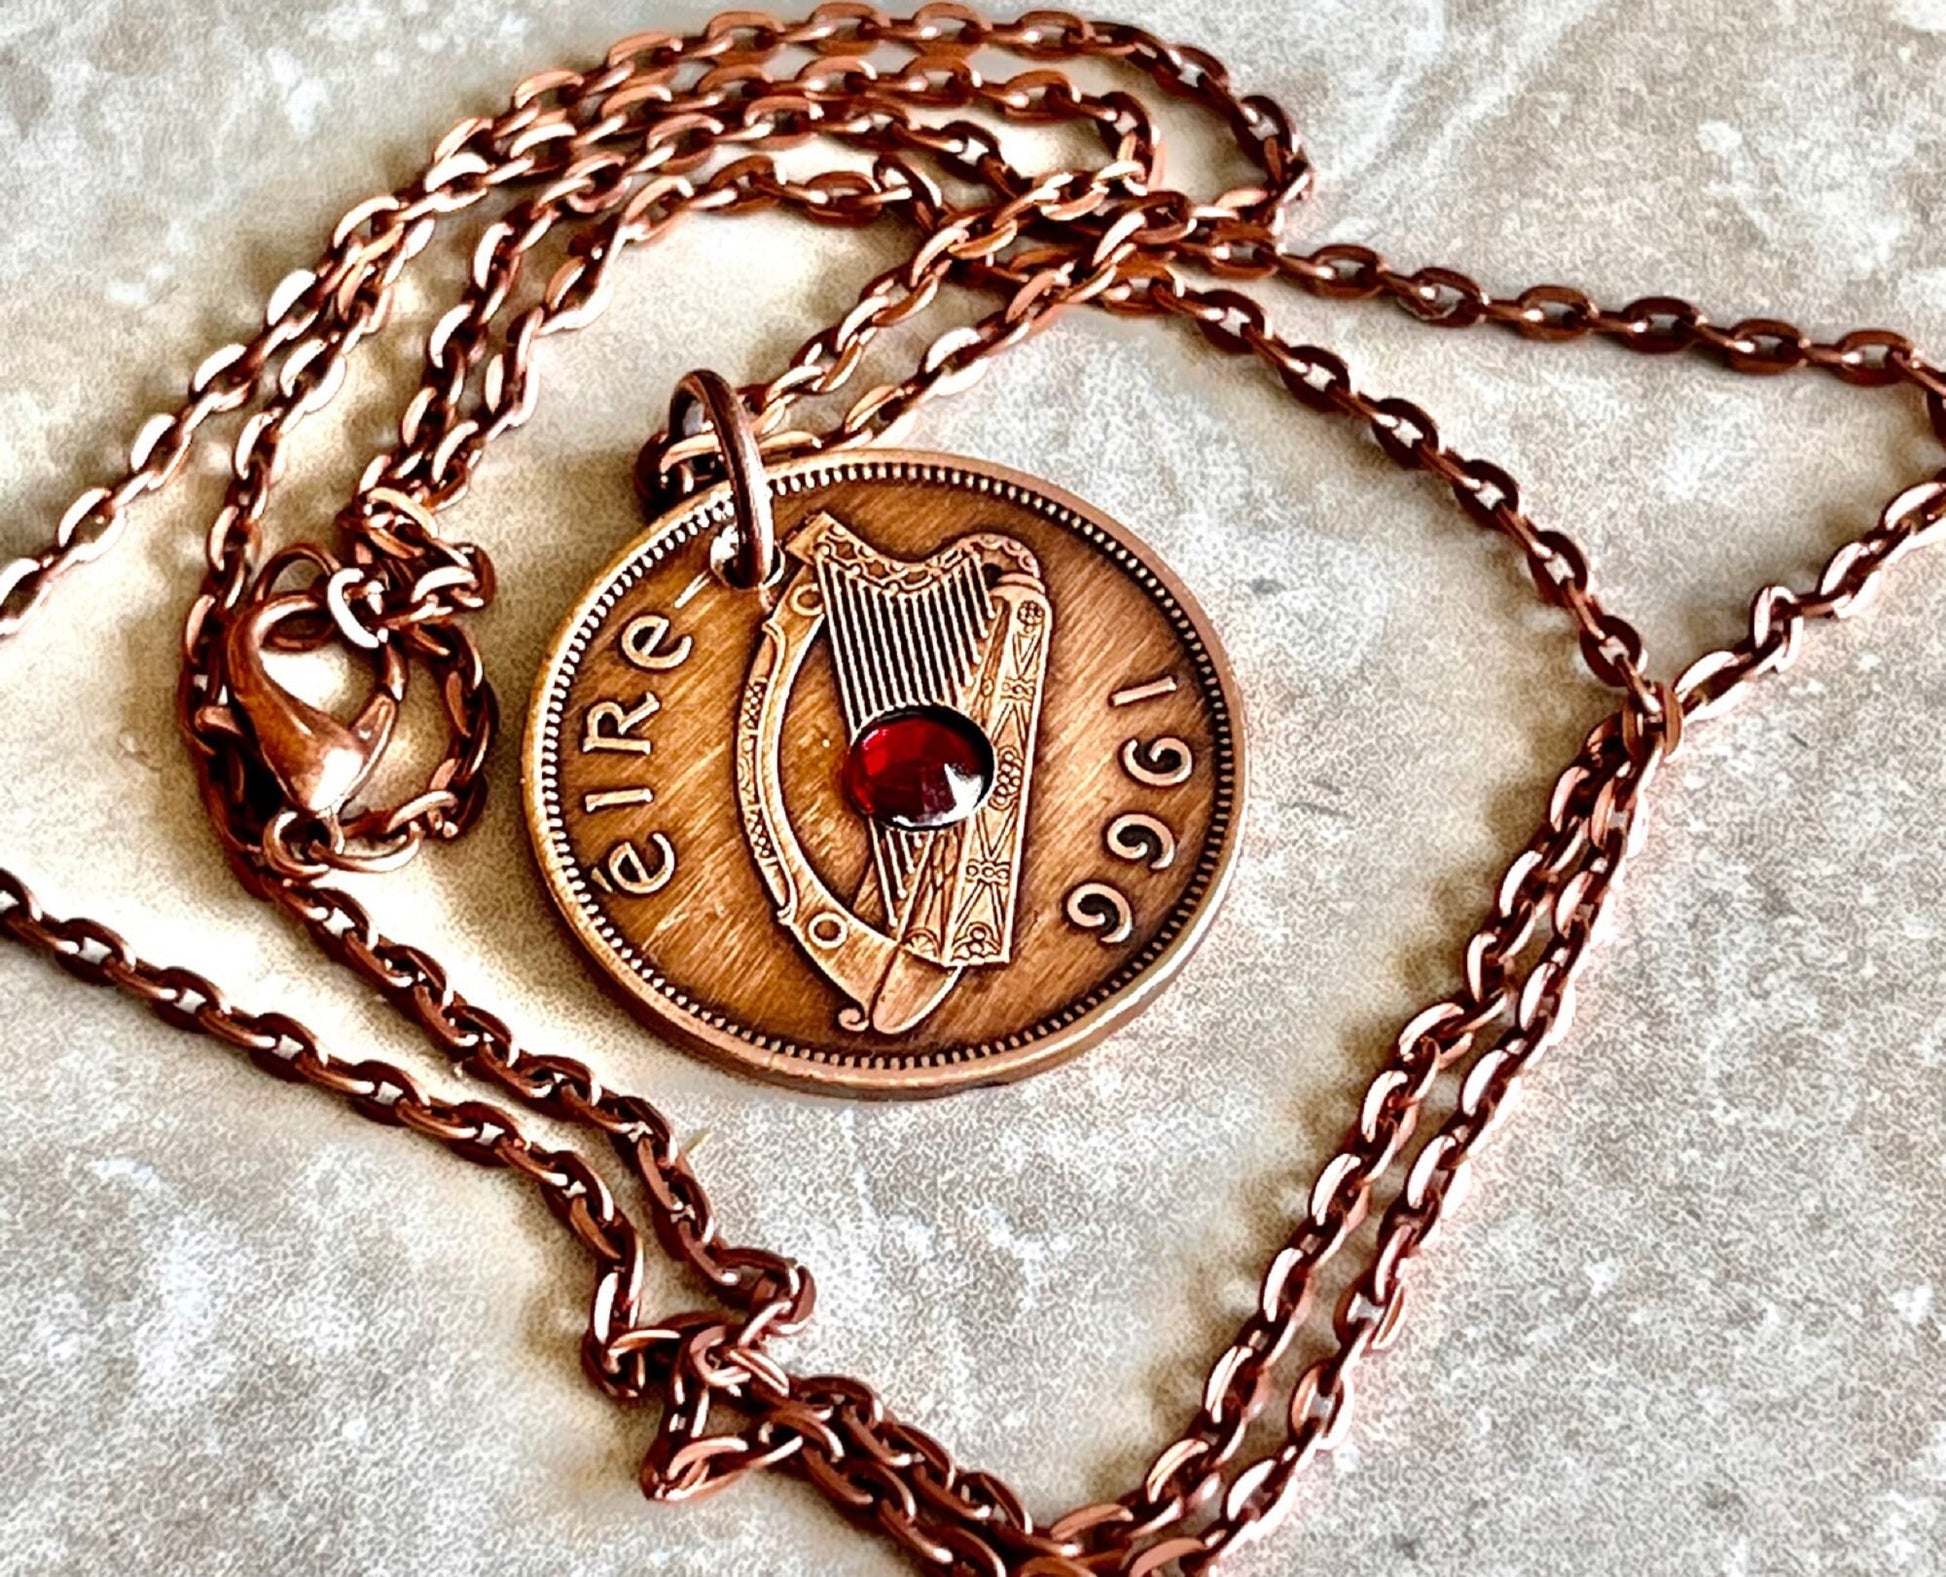 Ireland Coin Pendant 1/2 Pingin Irish Piglet Harp Necklace Rhinestone Gift For Friend Charm Gift For Him, Her, Coin Collector, World Coins